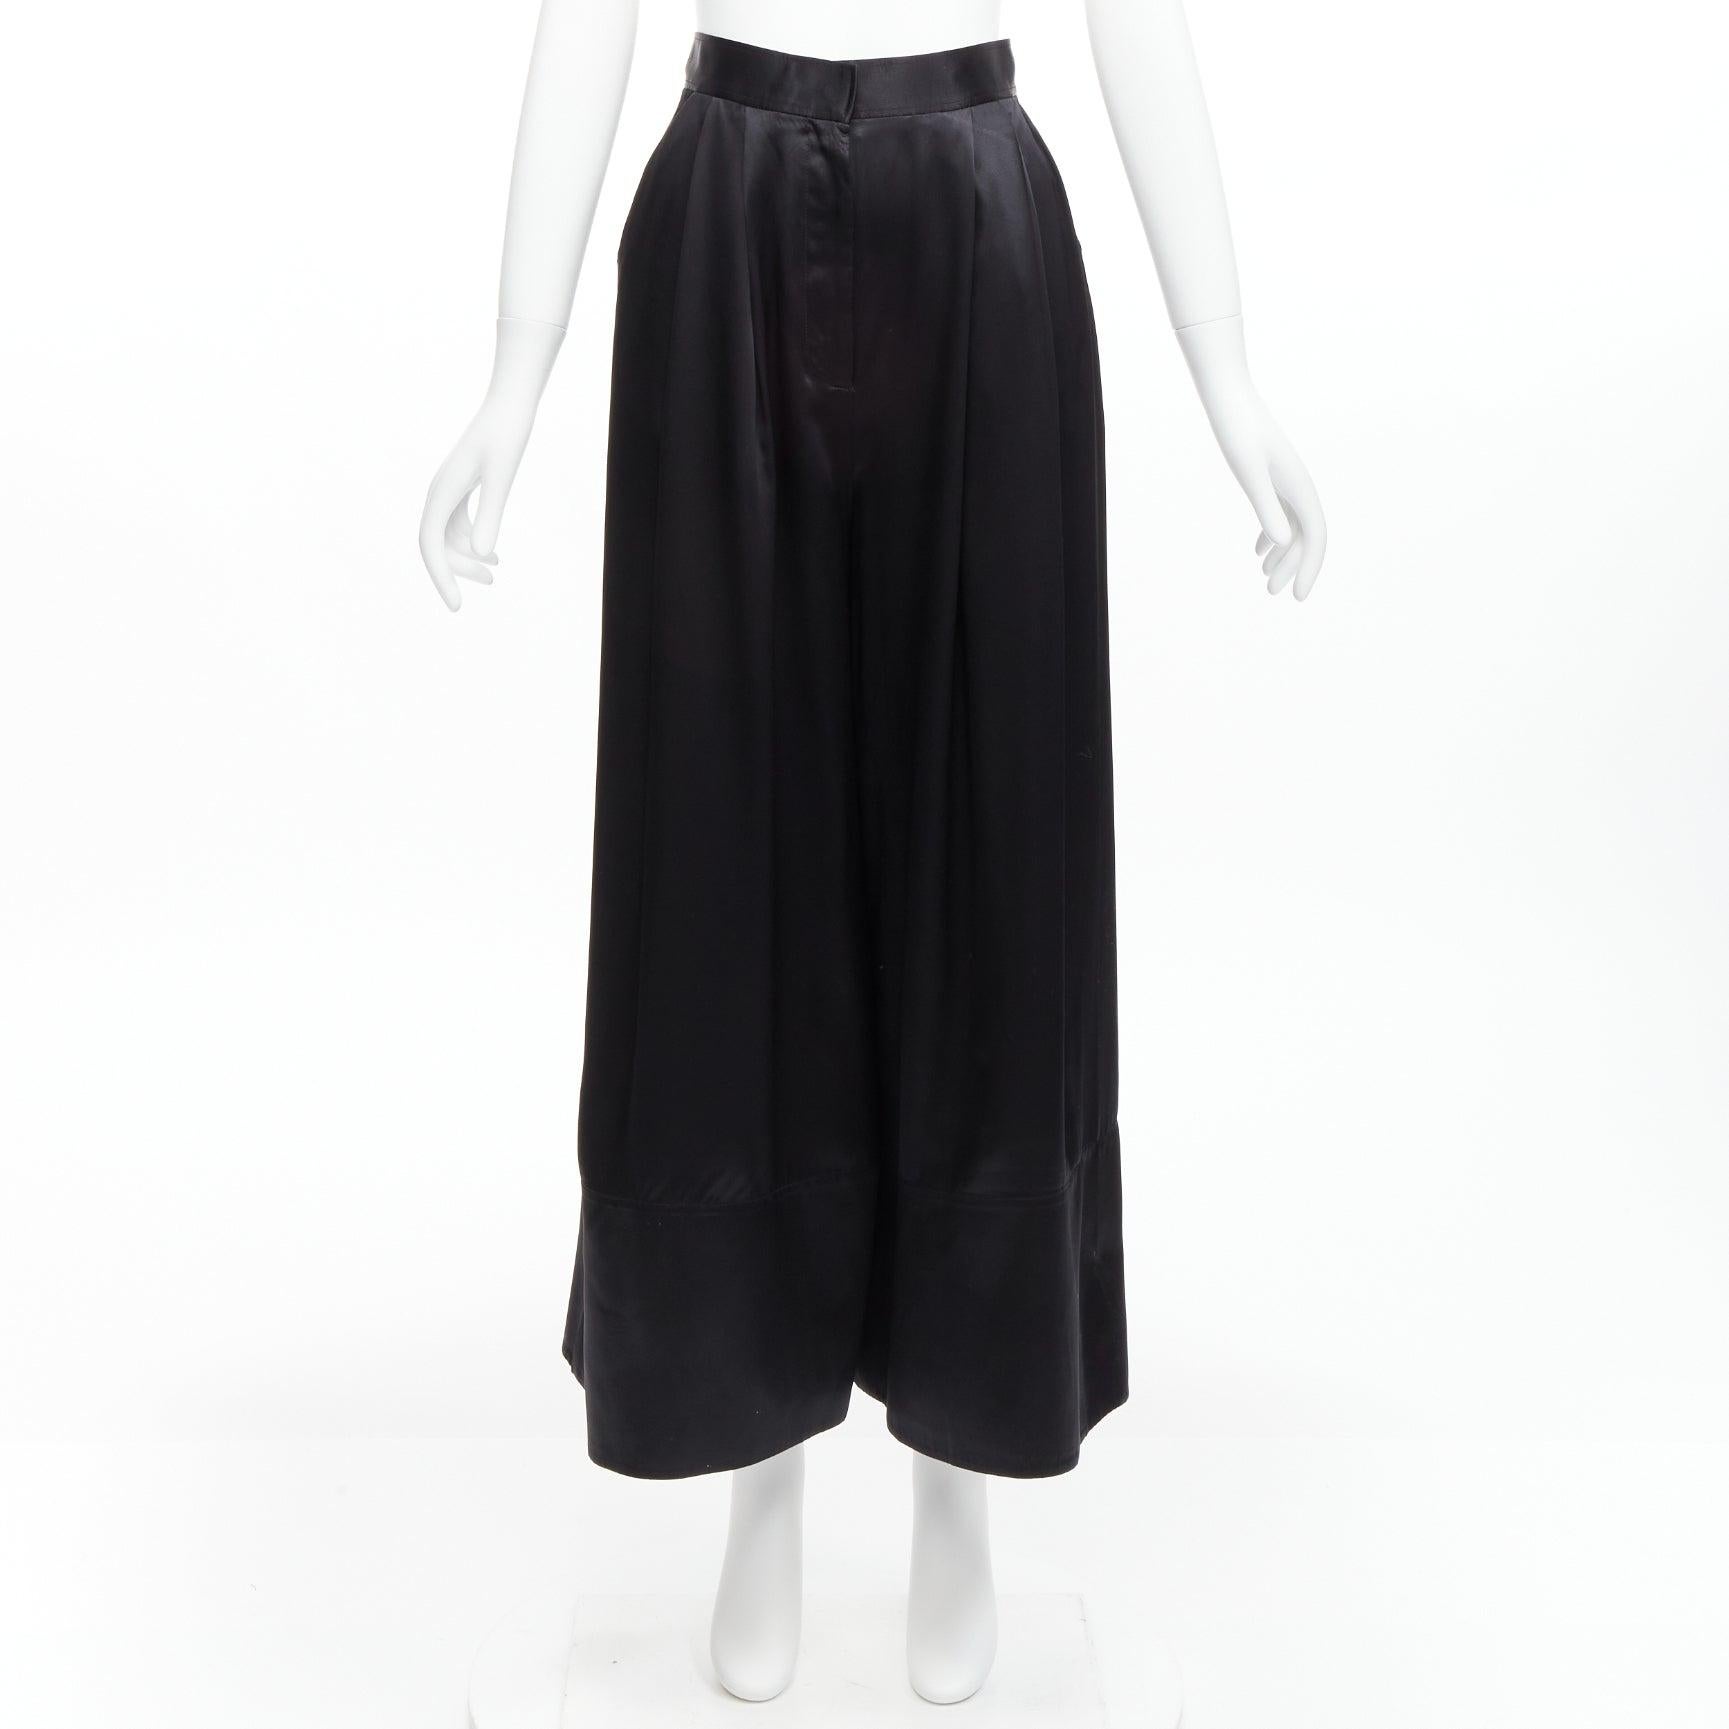 GIVENCHY RICCARDO TISCI black 100% silk satin high waisted wide leg pants
Reference: VACN/A00047
Brand: Givenchy
Designer: Riccardo Tisci
Material: Silk
Color: Black
Pattern: Solid
Closure: Zip Fly
Made in: Italy

CONDITION:
Condition: Excellent,